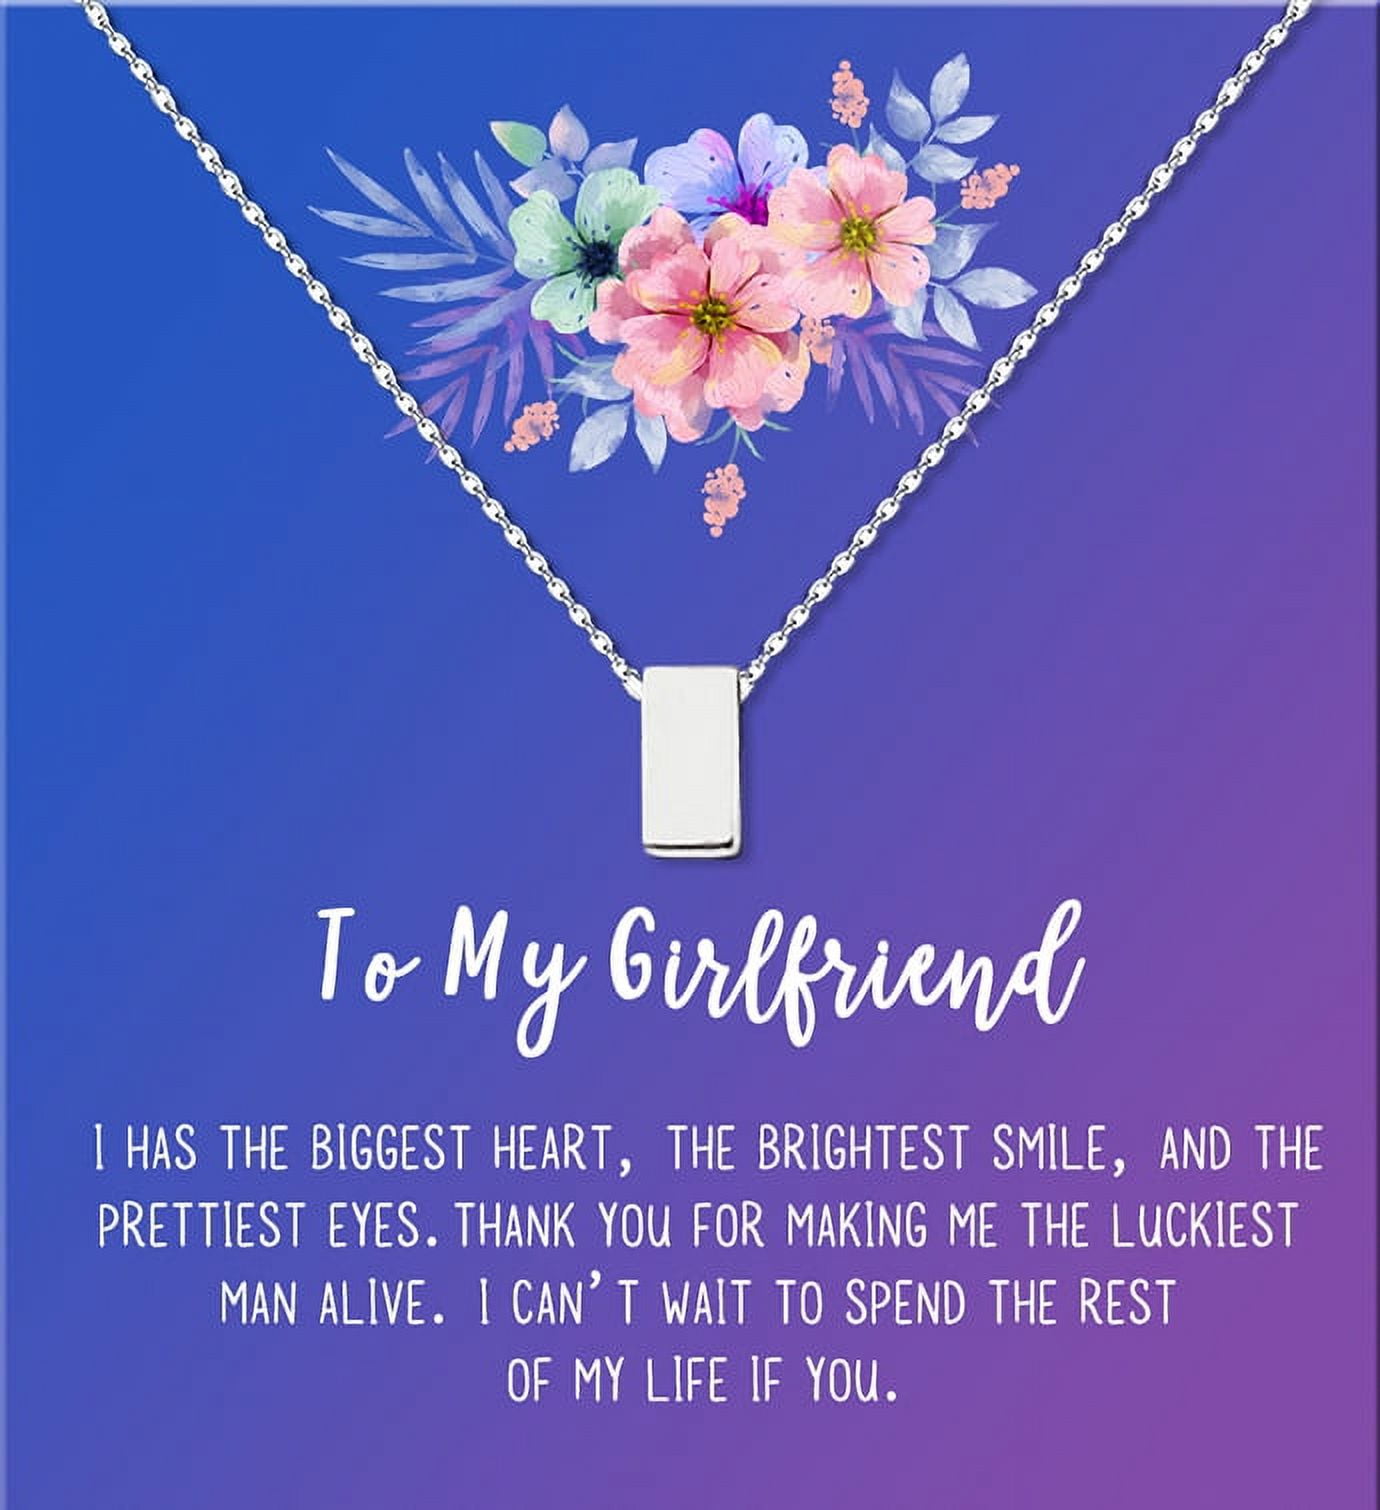 Perfect birthday gift for your girlfriend – Happyribbon